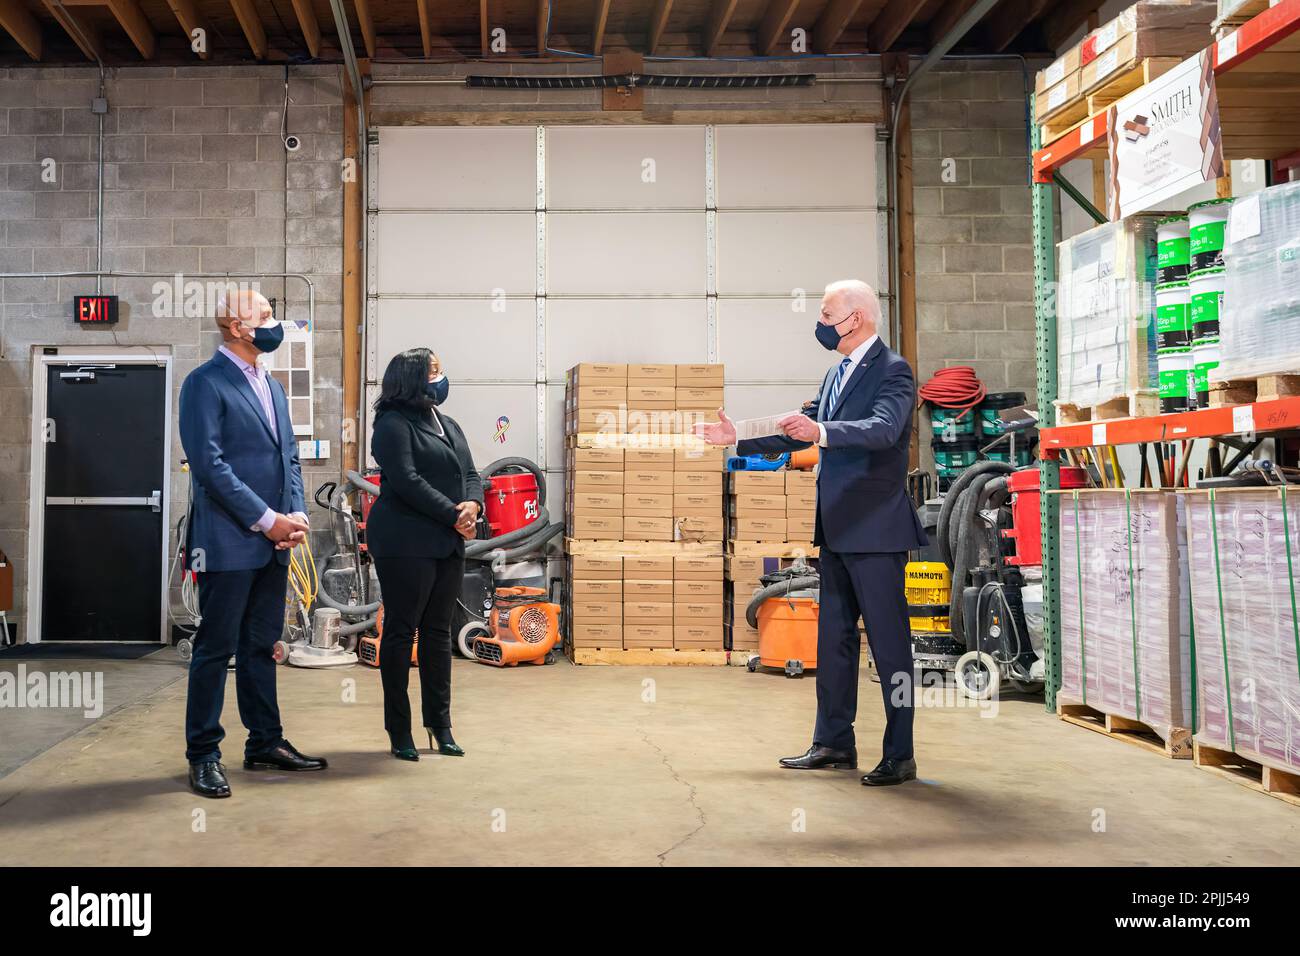 President Joe Biden talks with the owners of Smith Flooring Kristin Smith and James Smith Tuesday, March 16, 2021, at their store in Chester, Pennsylvania. (Official White House Photo by Adam Schultz) Stock Photo